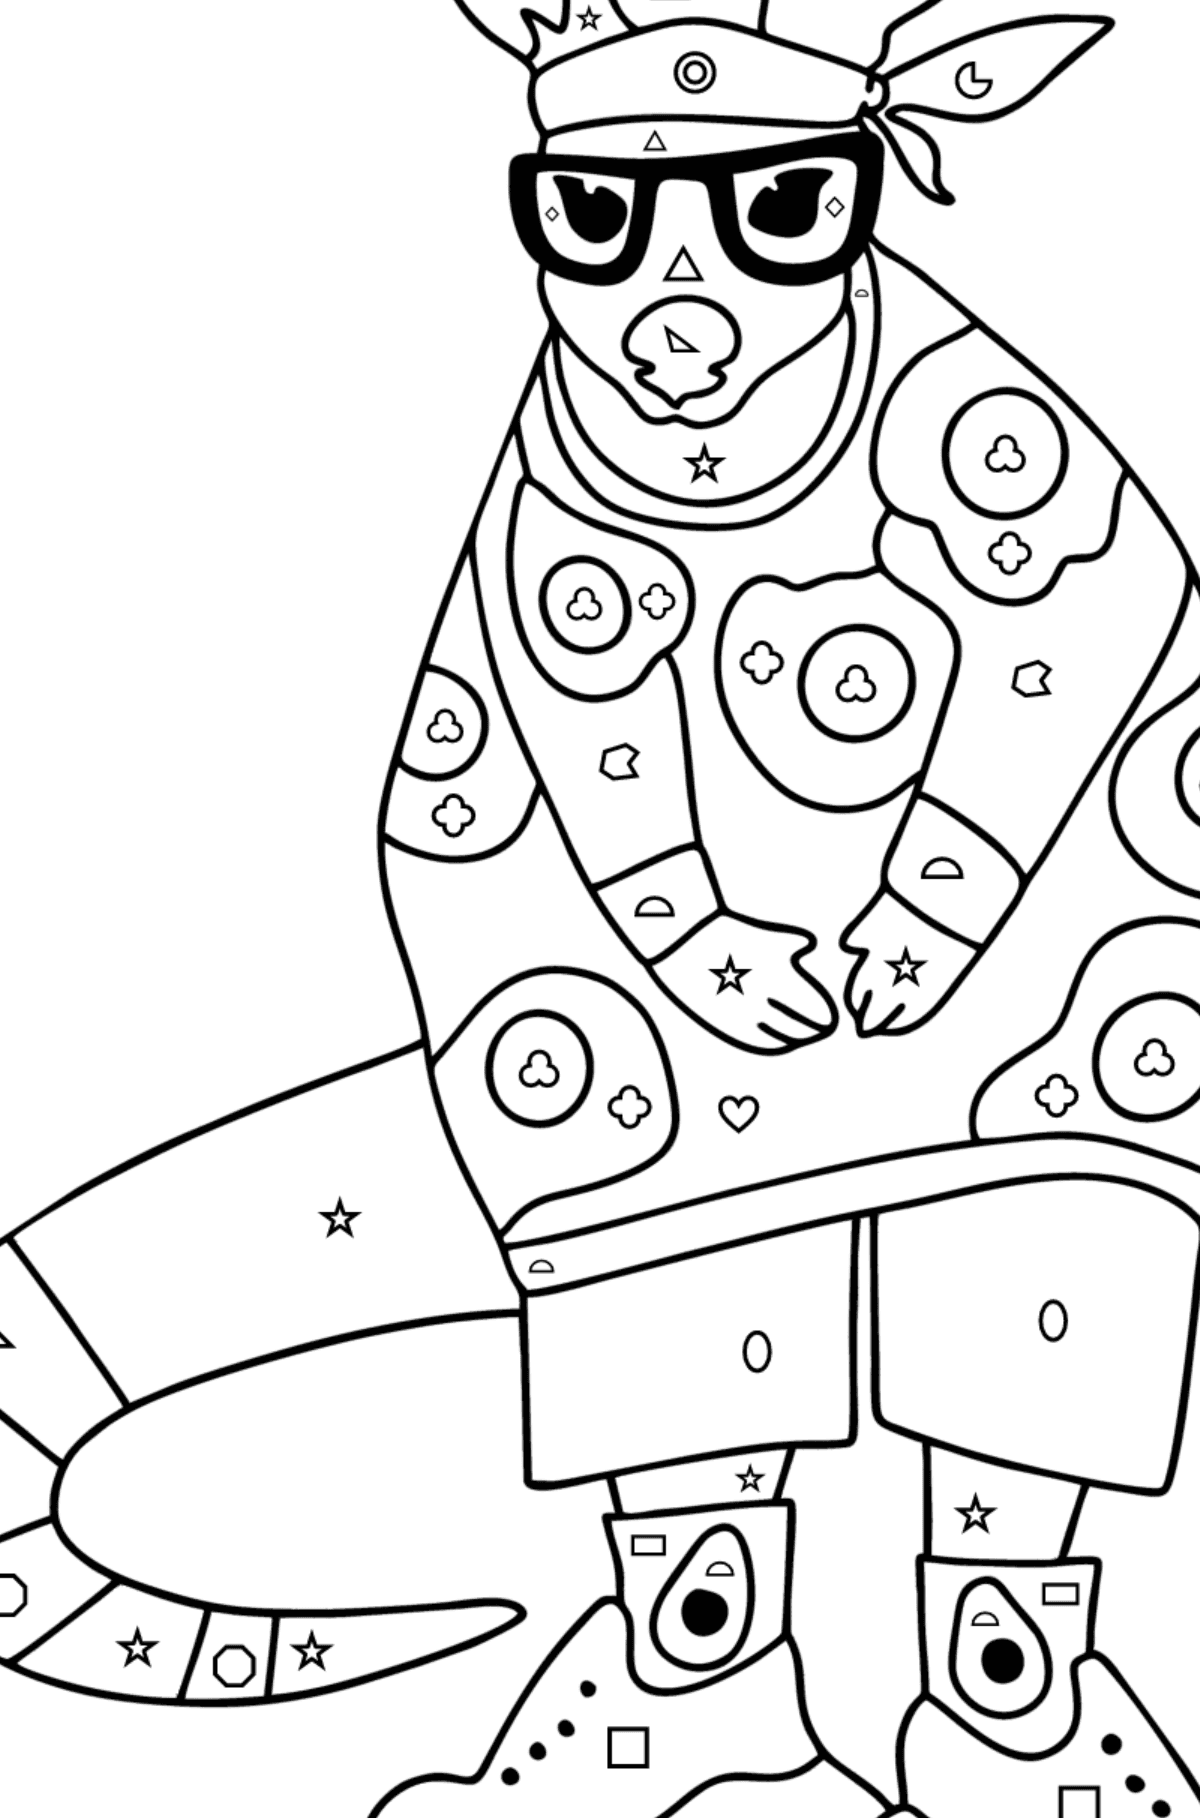 Cartoon Kangaroo coloring page - Coloring by Geometric Shapes for Kids